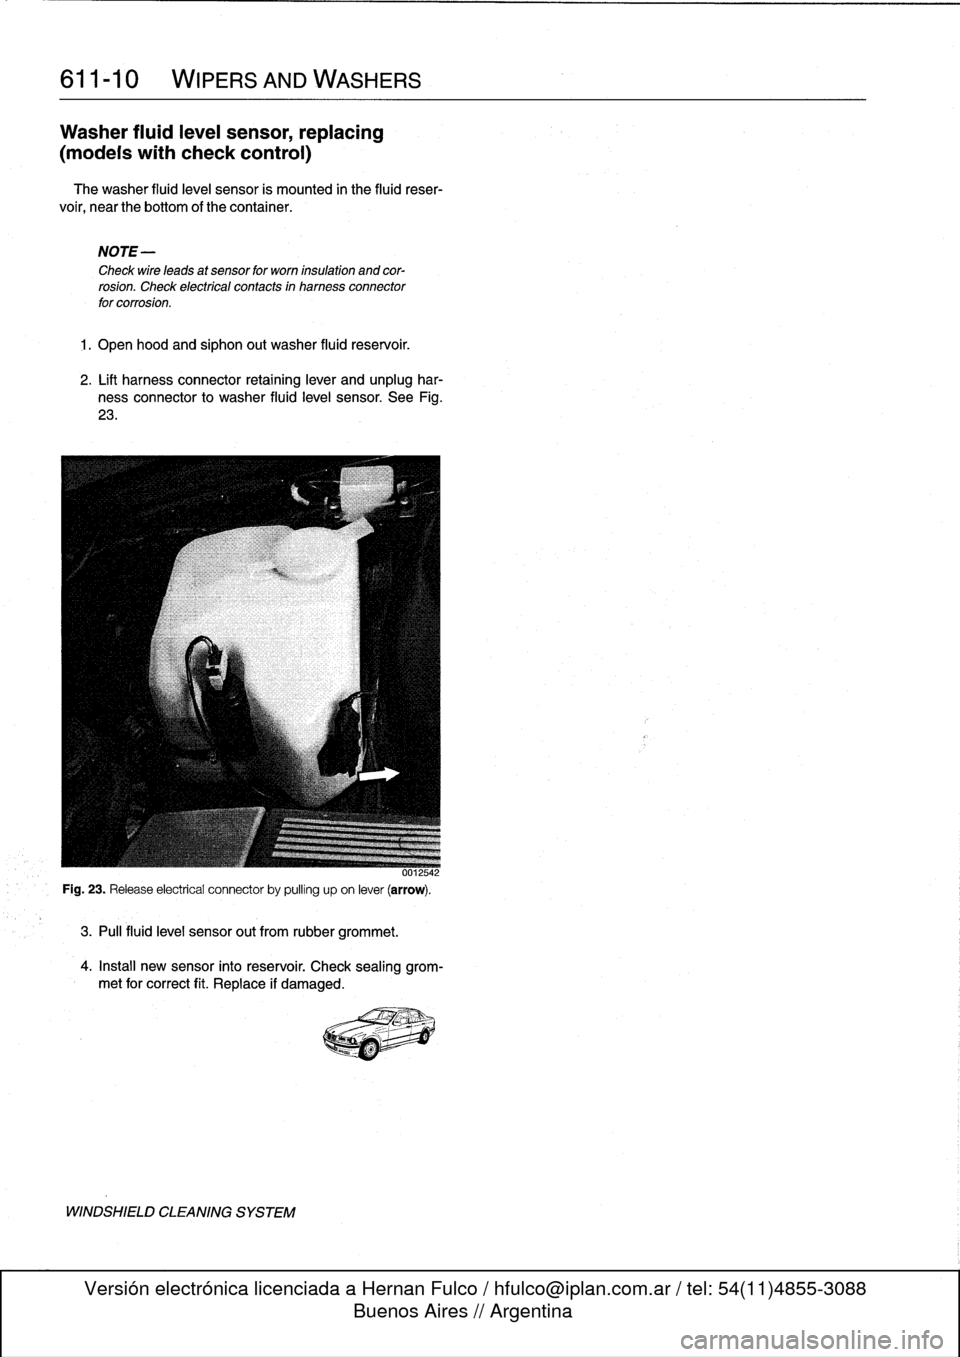 BMW 325i 1998 E36 Workshop Manual 
611-
1
0

	

WIPERS
AND
WASHERS

Washer
fluidleve¡
sensor,
replacing

(modeis
with
check
control)

The
washer
fluid
level
sensor
is
mounted
in
the
fluid
reser-

voir,
near
the
bottom
of
thecontainer